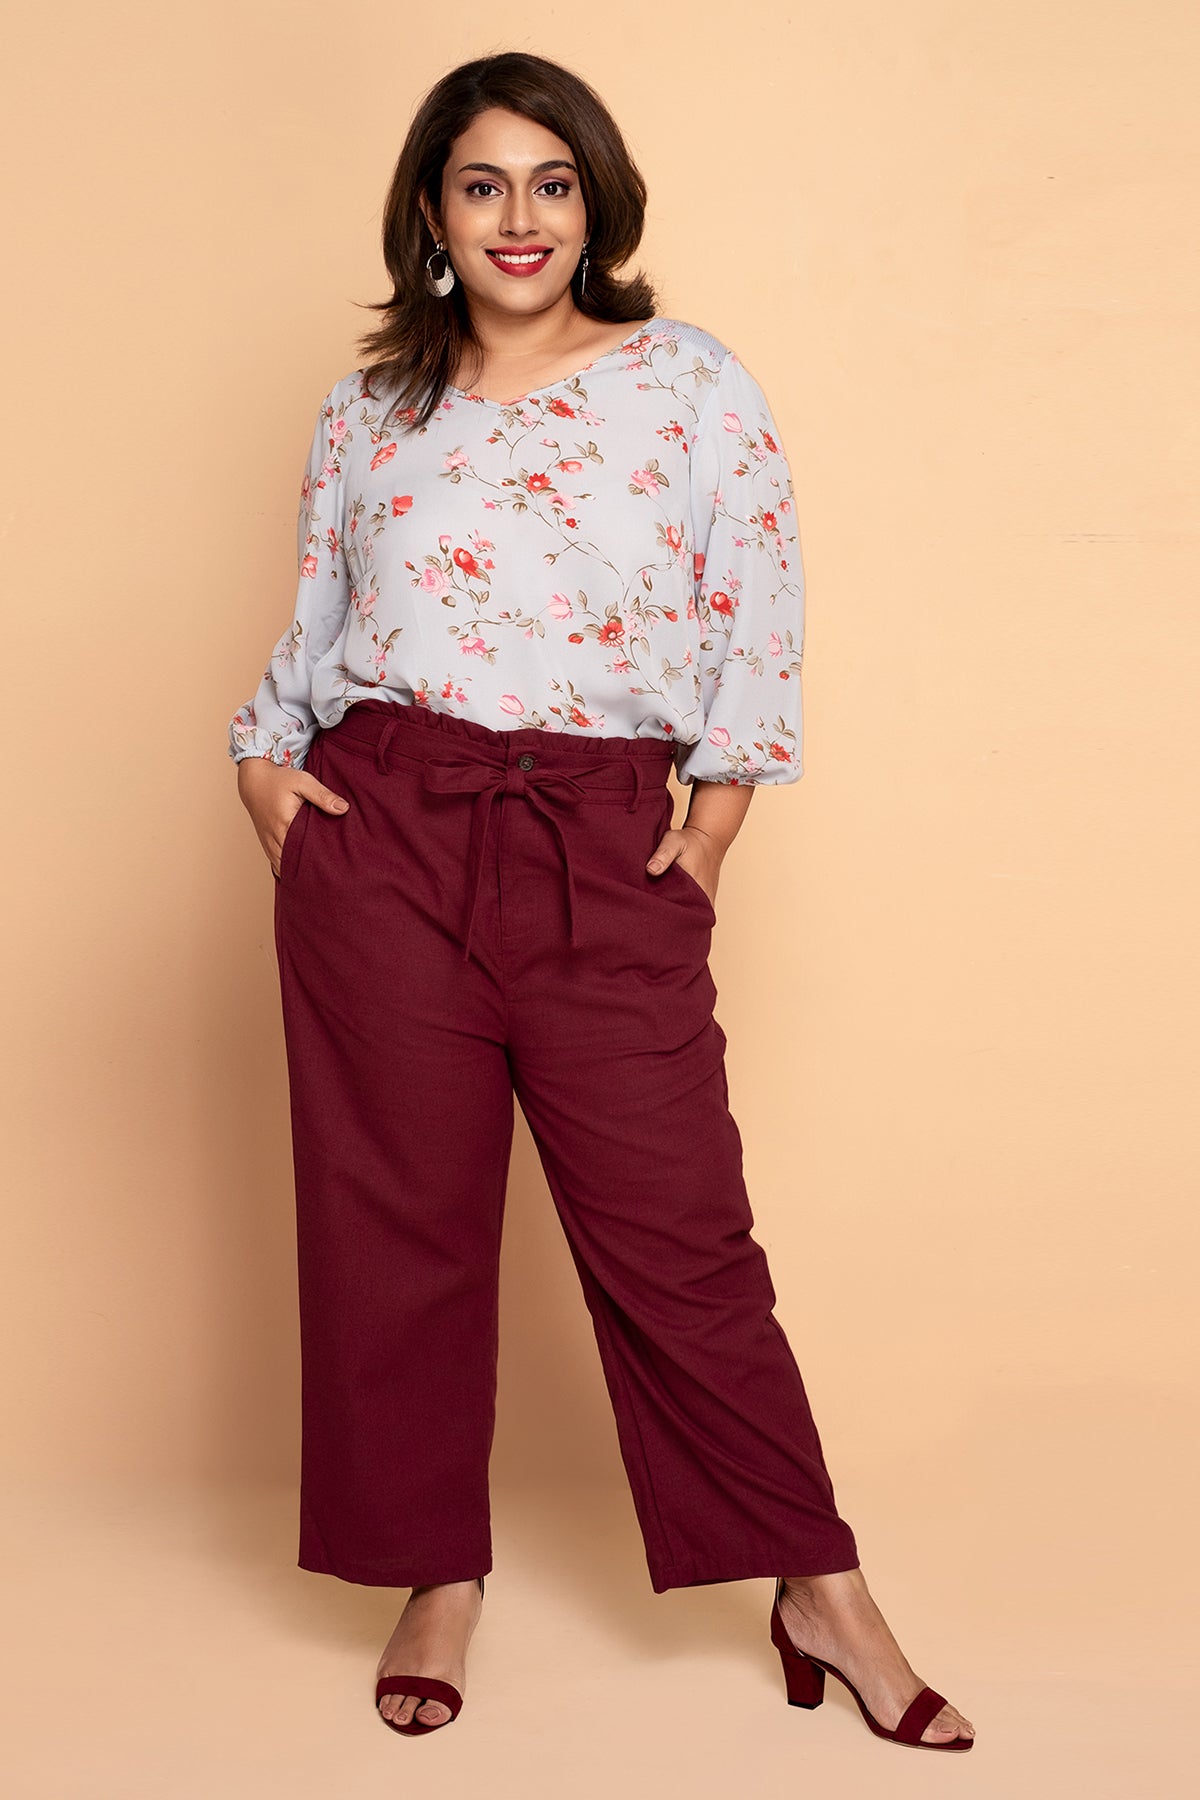 Women's Clothing - Cool Planet Corporate Site